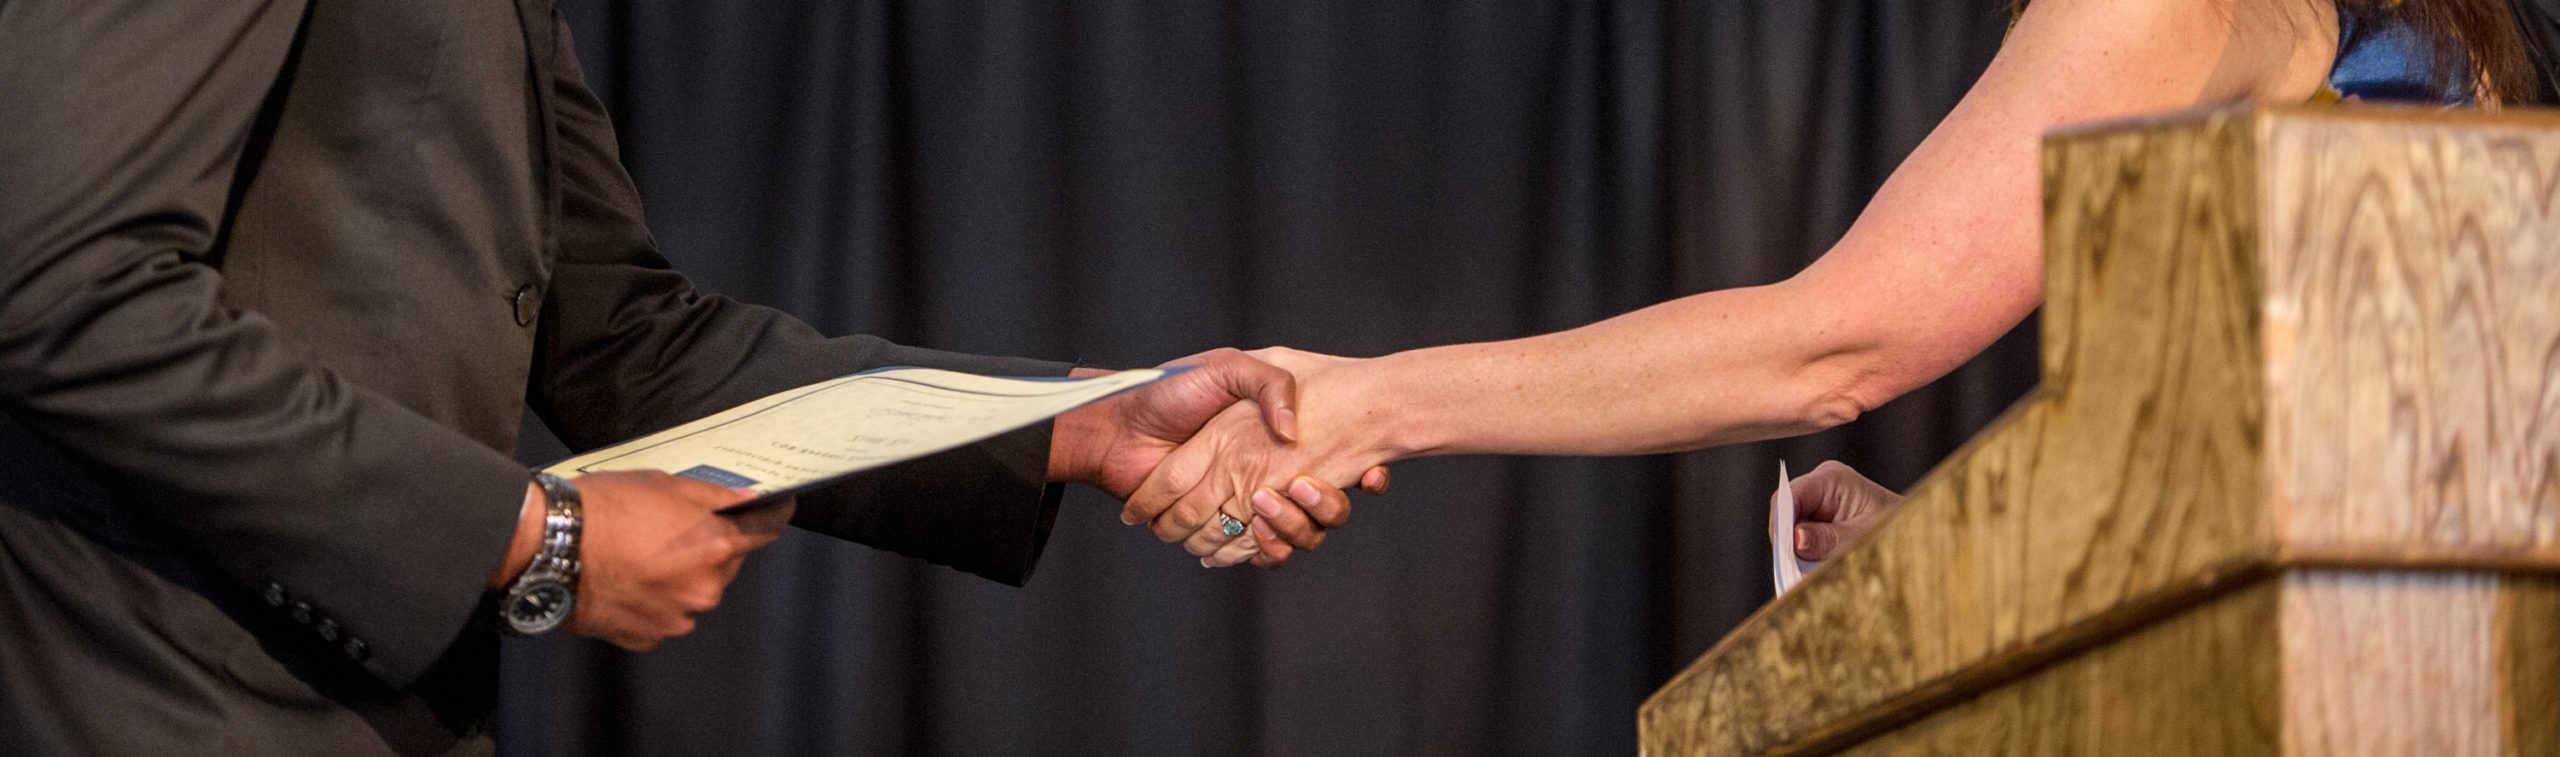 Two individual handshaking with an envelope.